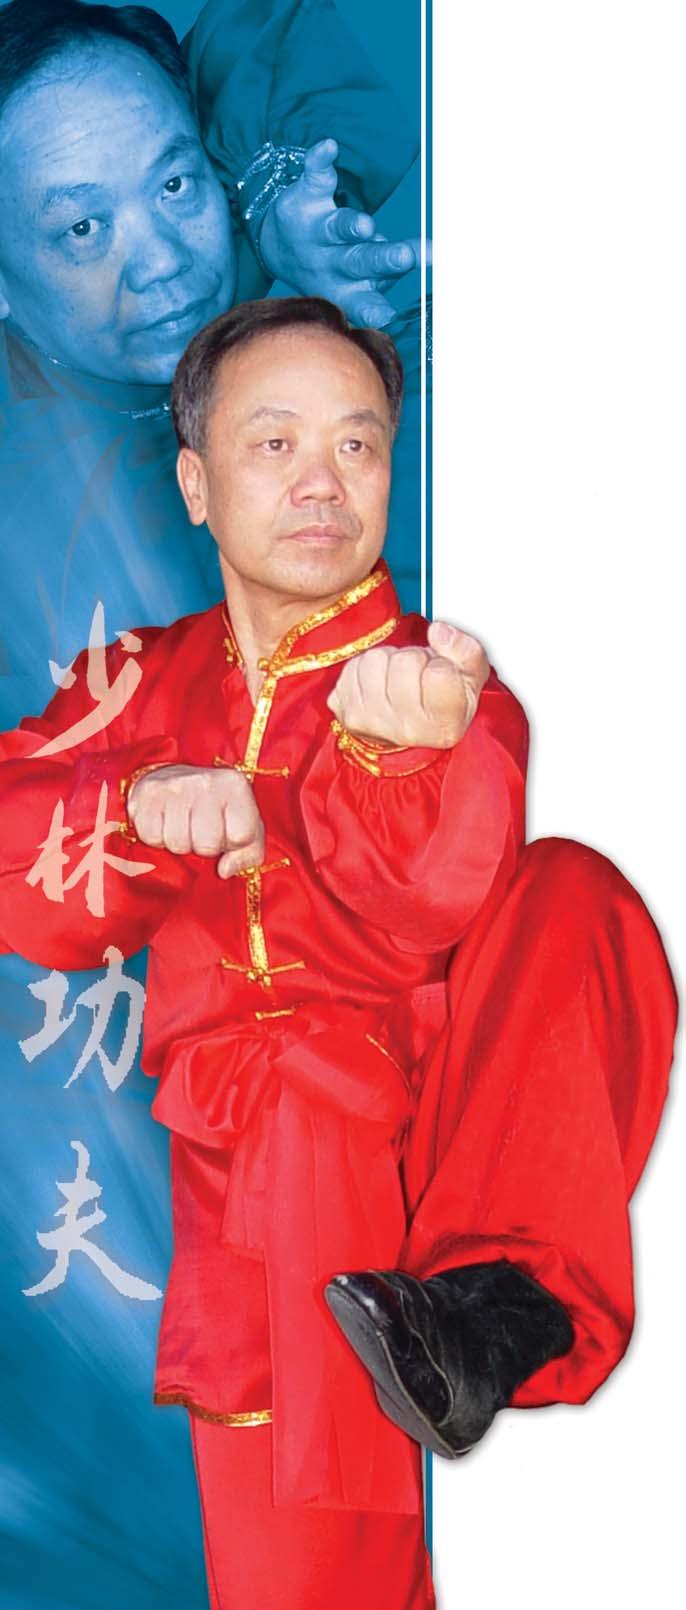 Shaolin Instruc tional Videos Now you can learn the once secret art of Shaolin Kung Fu in your own Home.